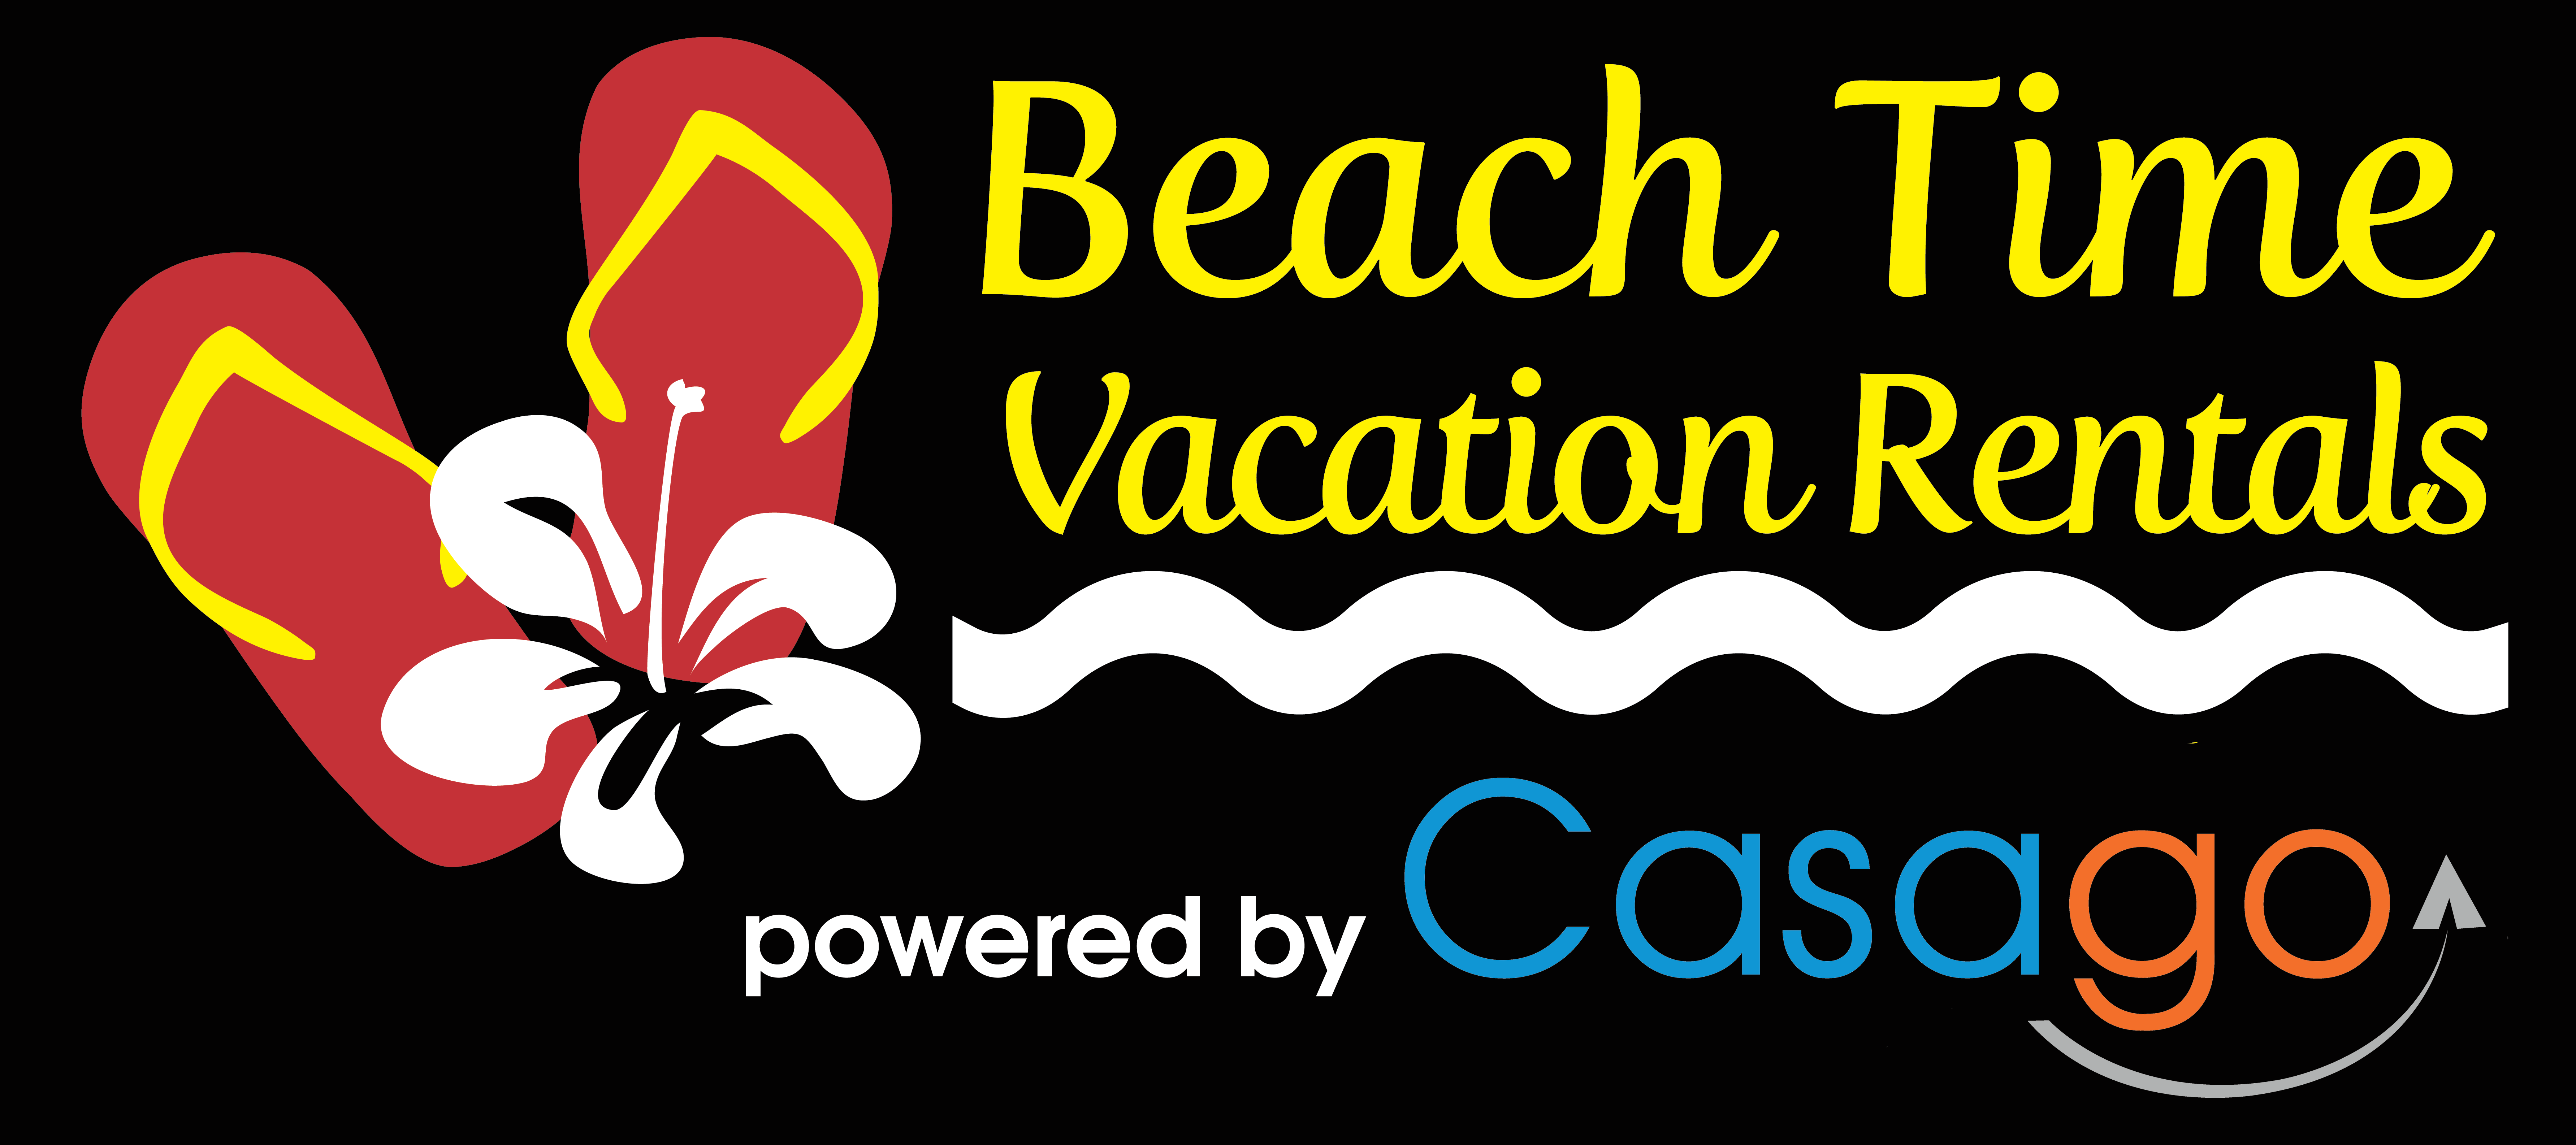 Beach Time Vacation Rentals